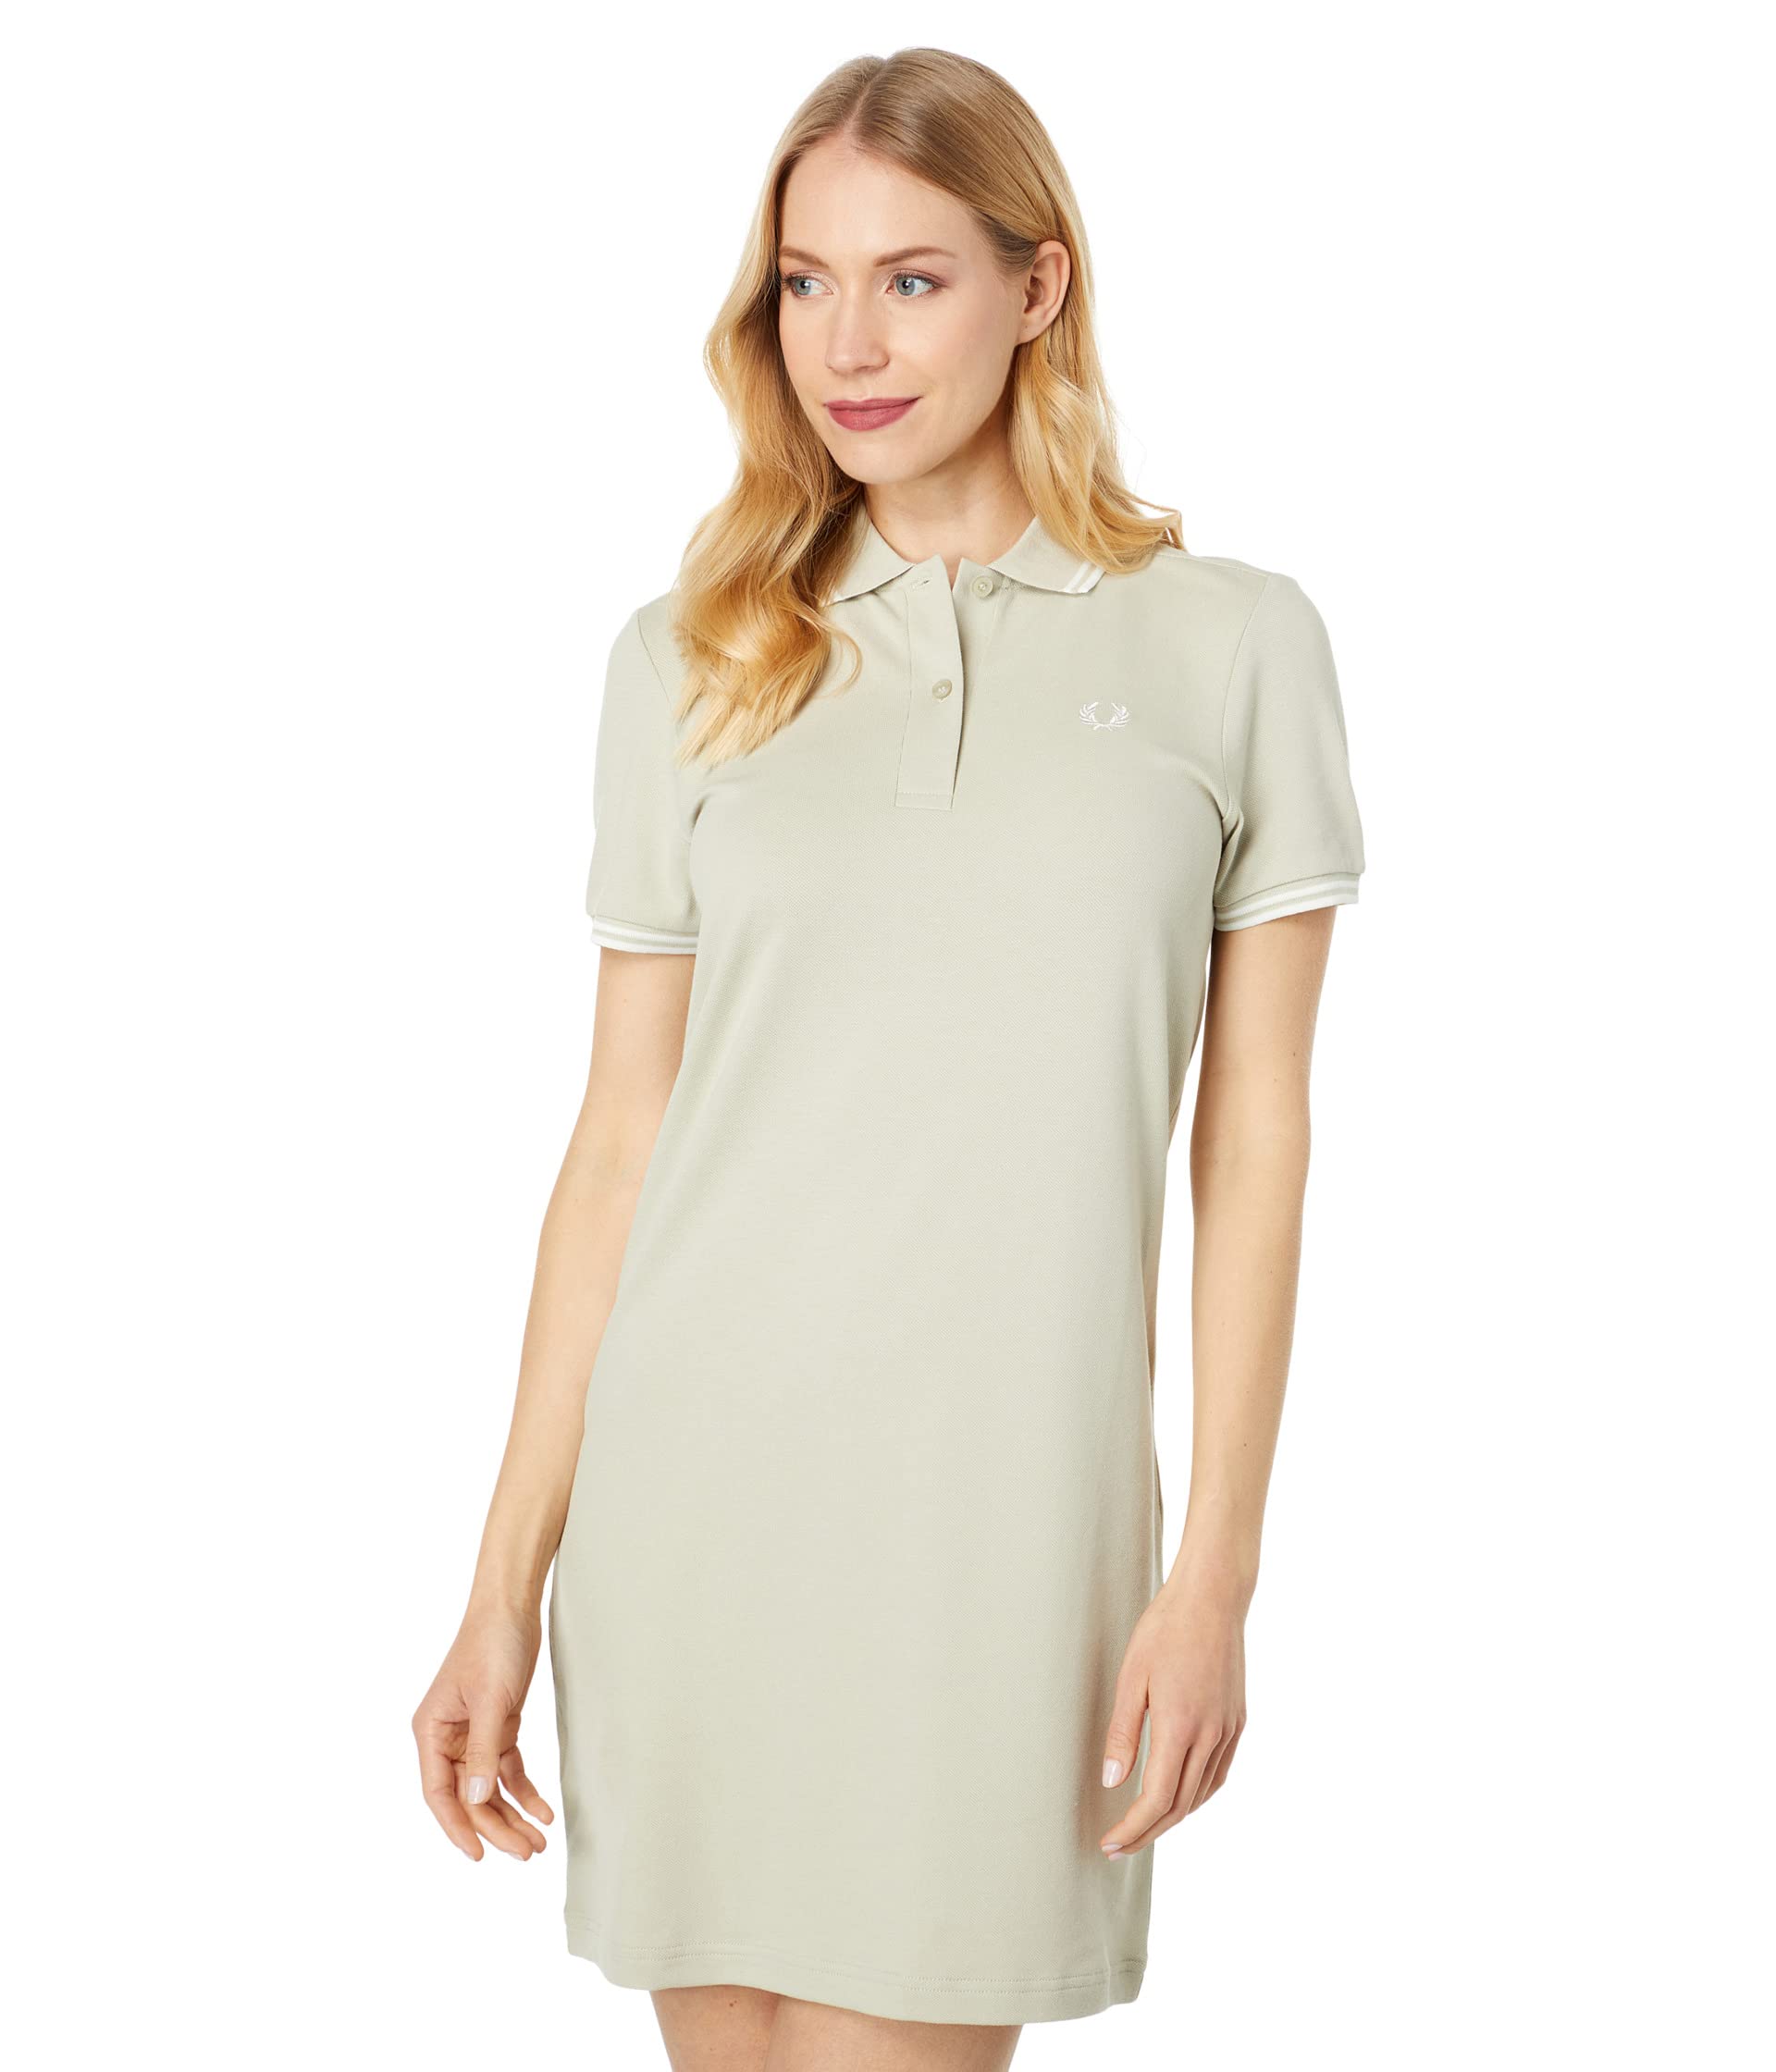 Платье Fred Perry, Twin Tipped Fred Perry Dress платье женское fred perry размер 34